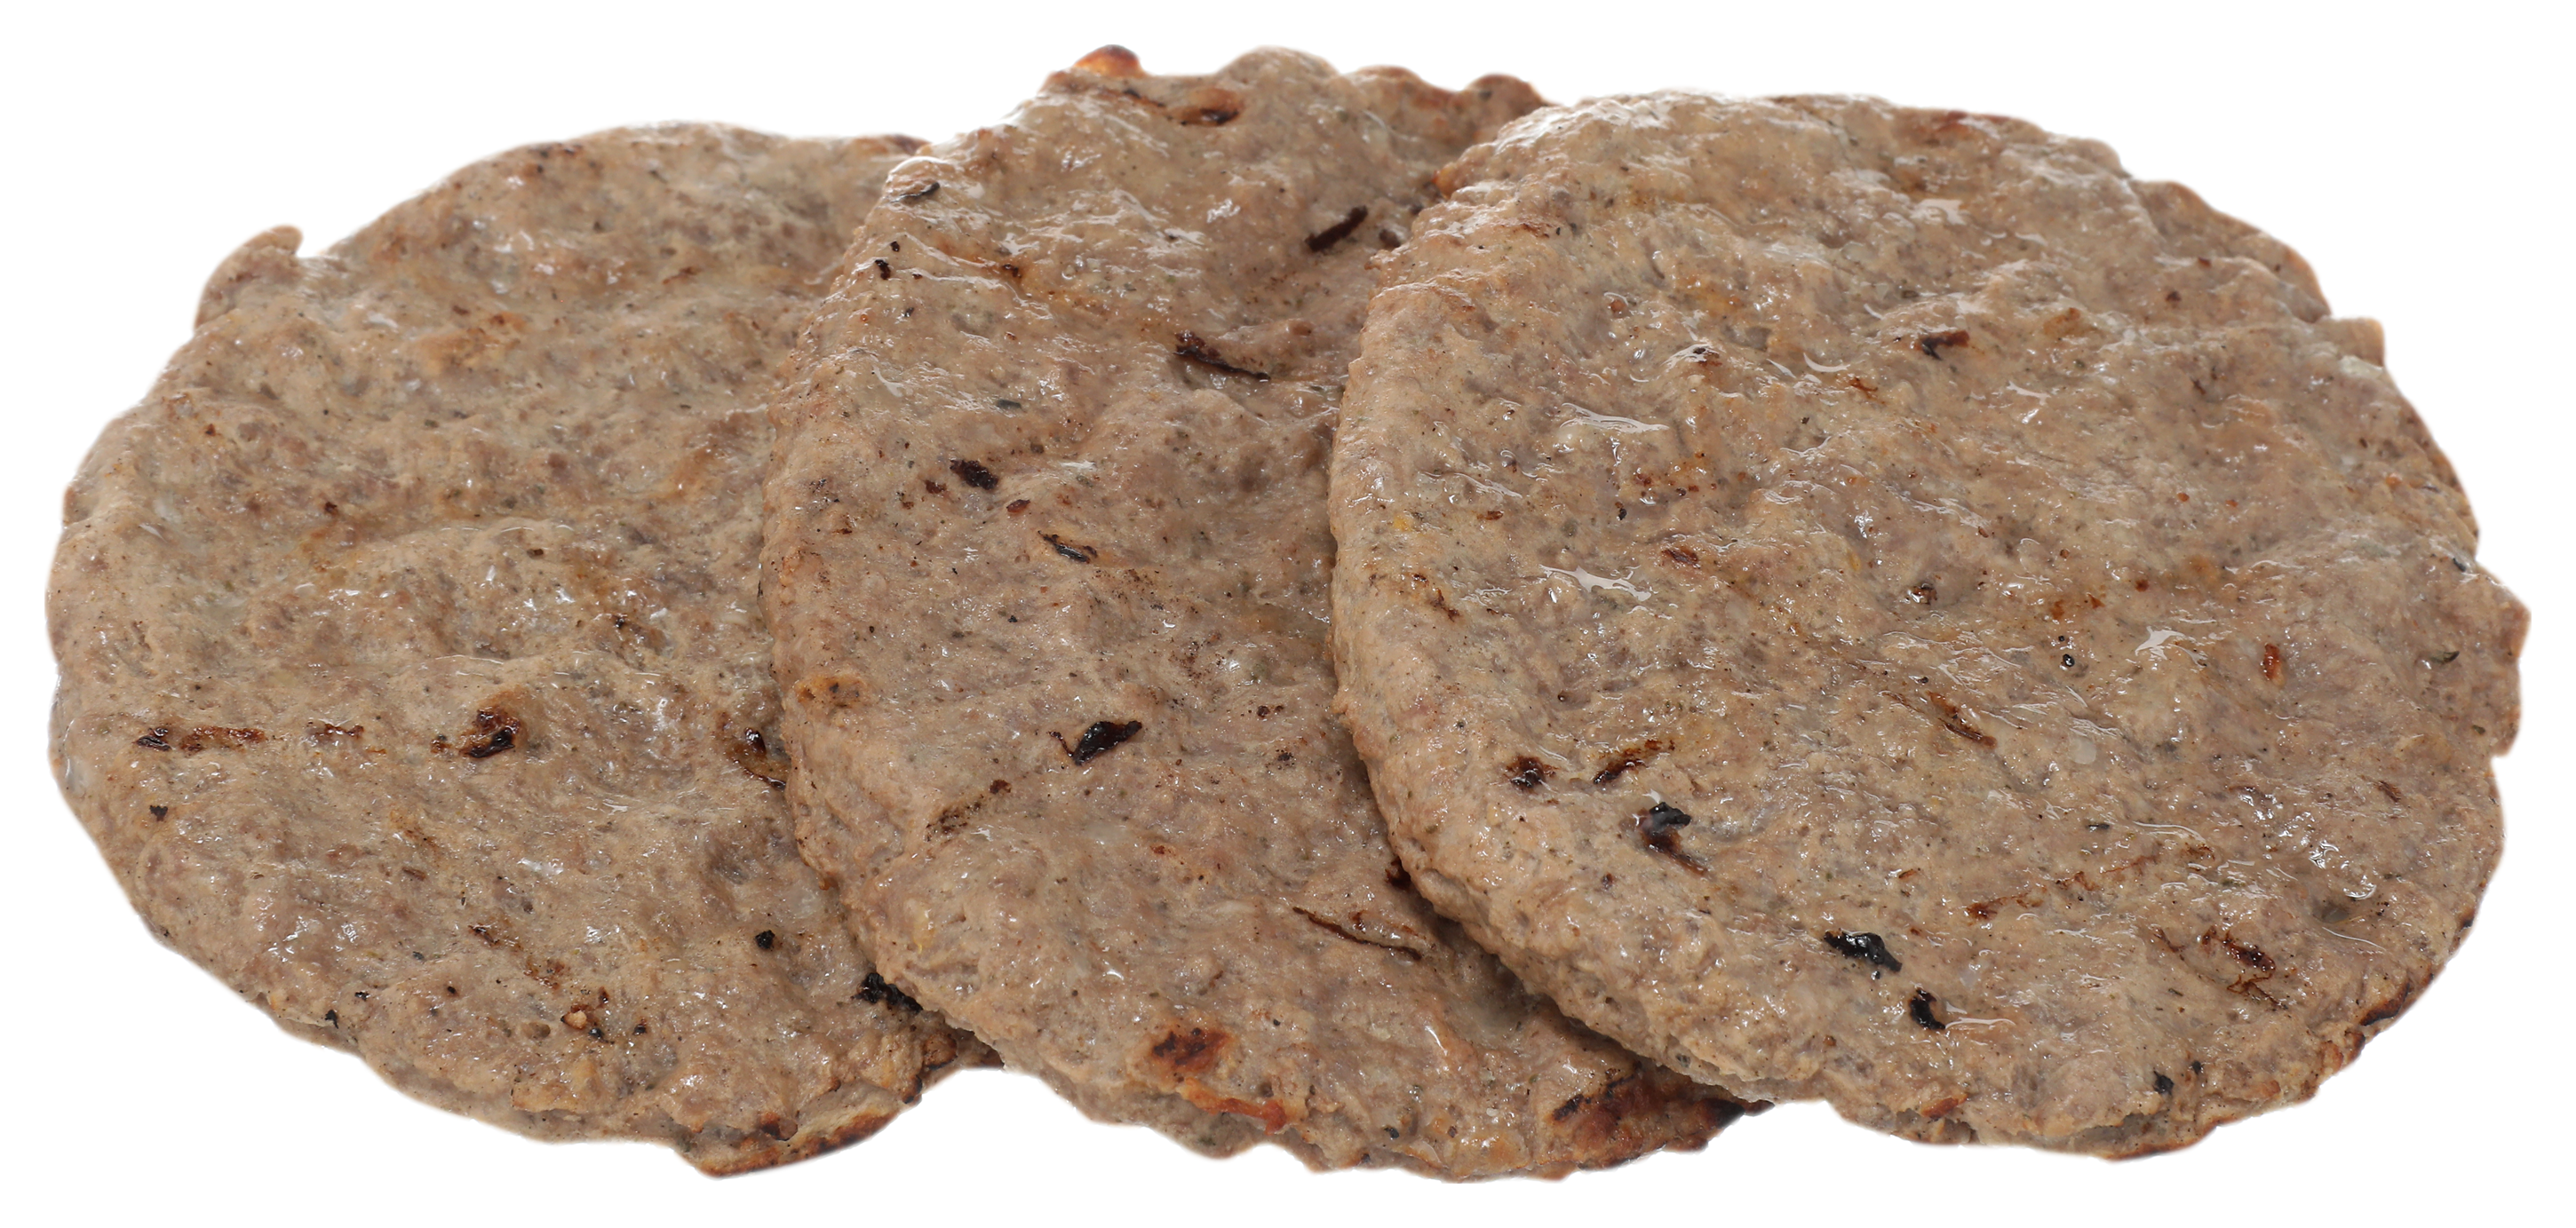 AdvancePierre™ Fully Cooked Beef Sausage Pattie, 1.21 oz